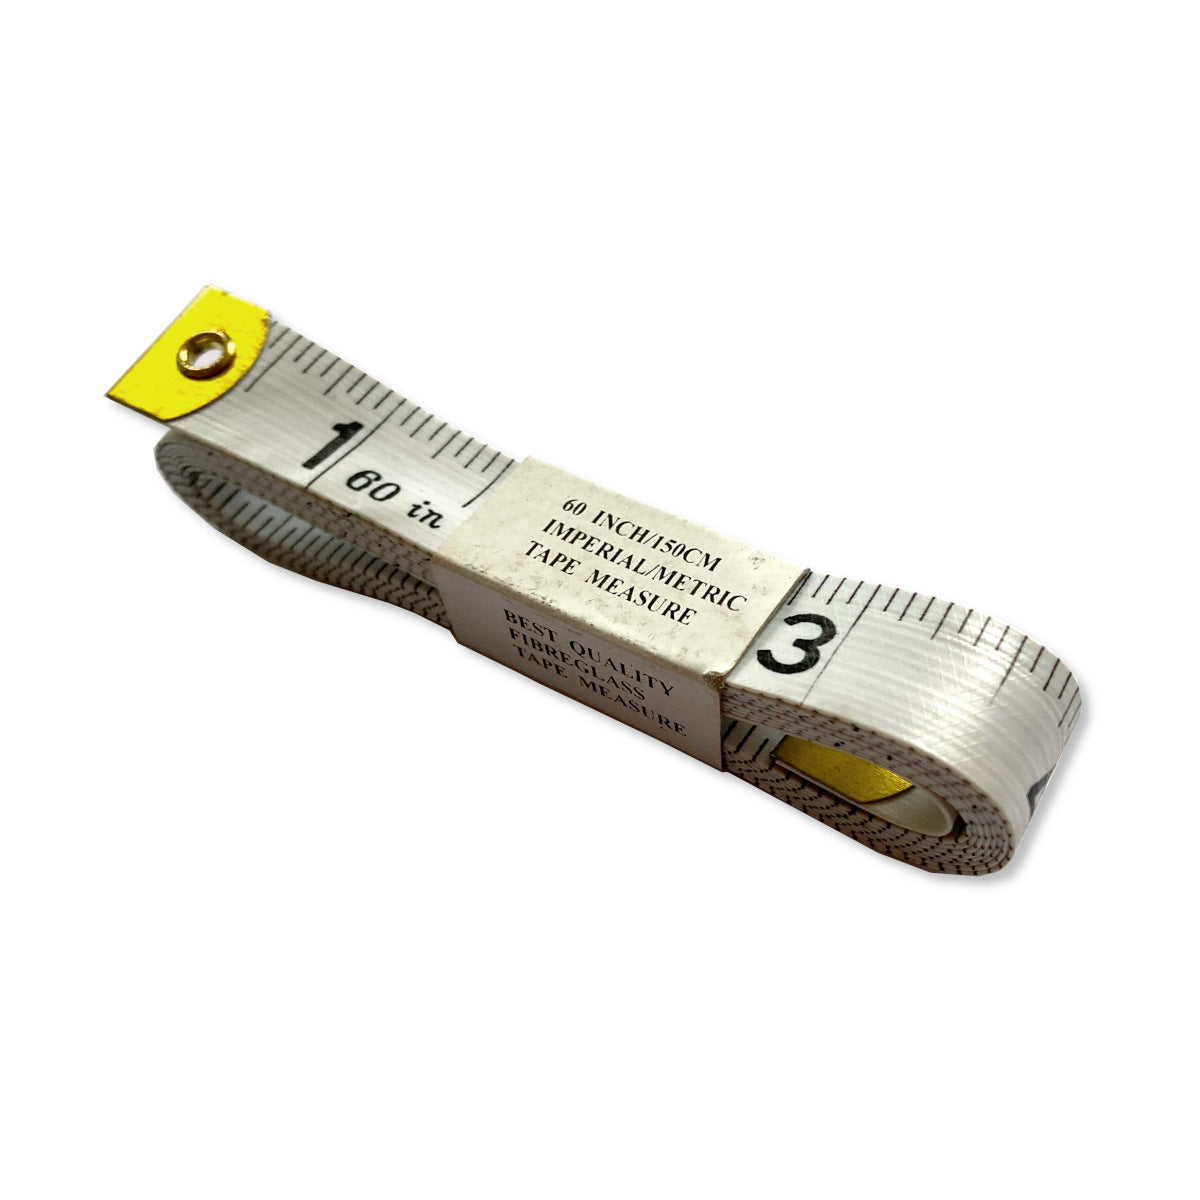 Tape measure rolled up